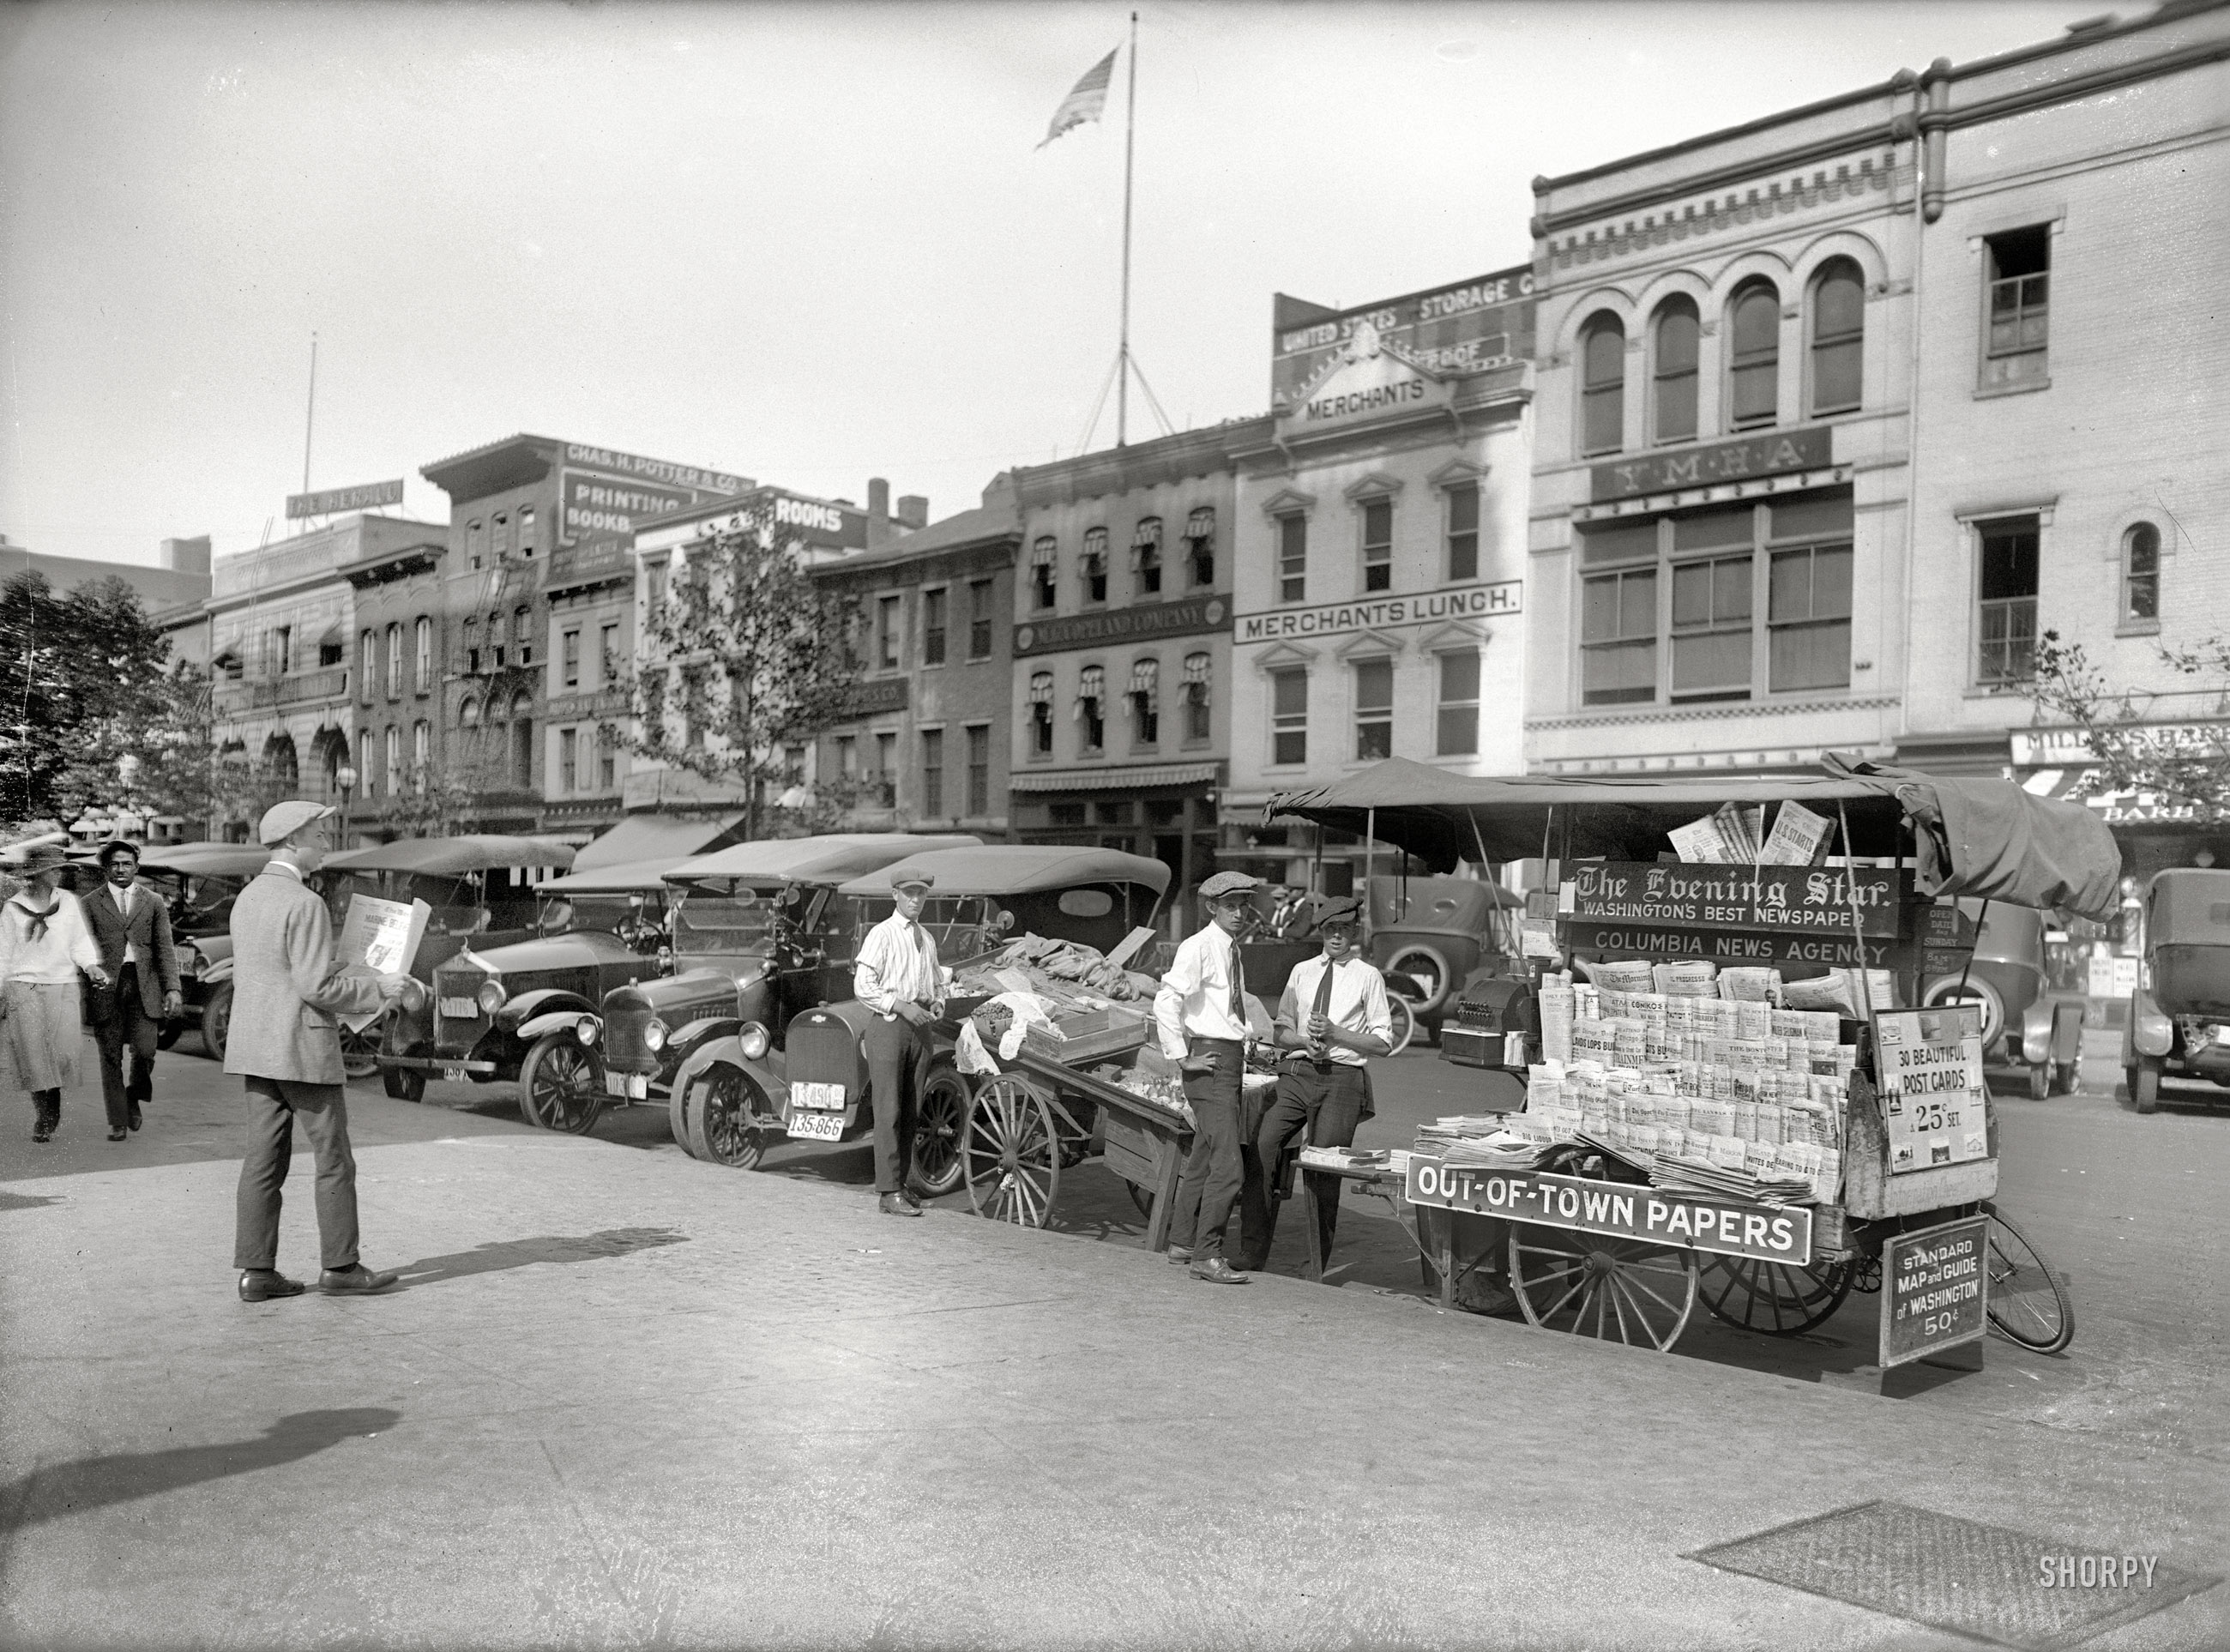 Washington, D.C., 1921. "National Fruit Co." Out-of-town bananas and news. National Photo Company Collection glass negative. View full size.